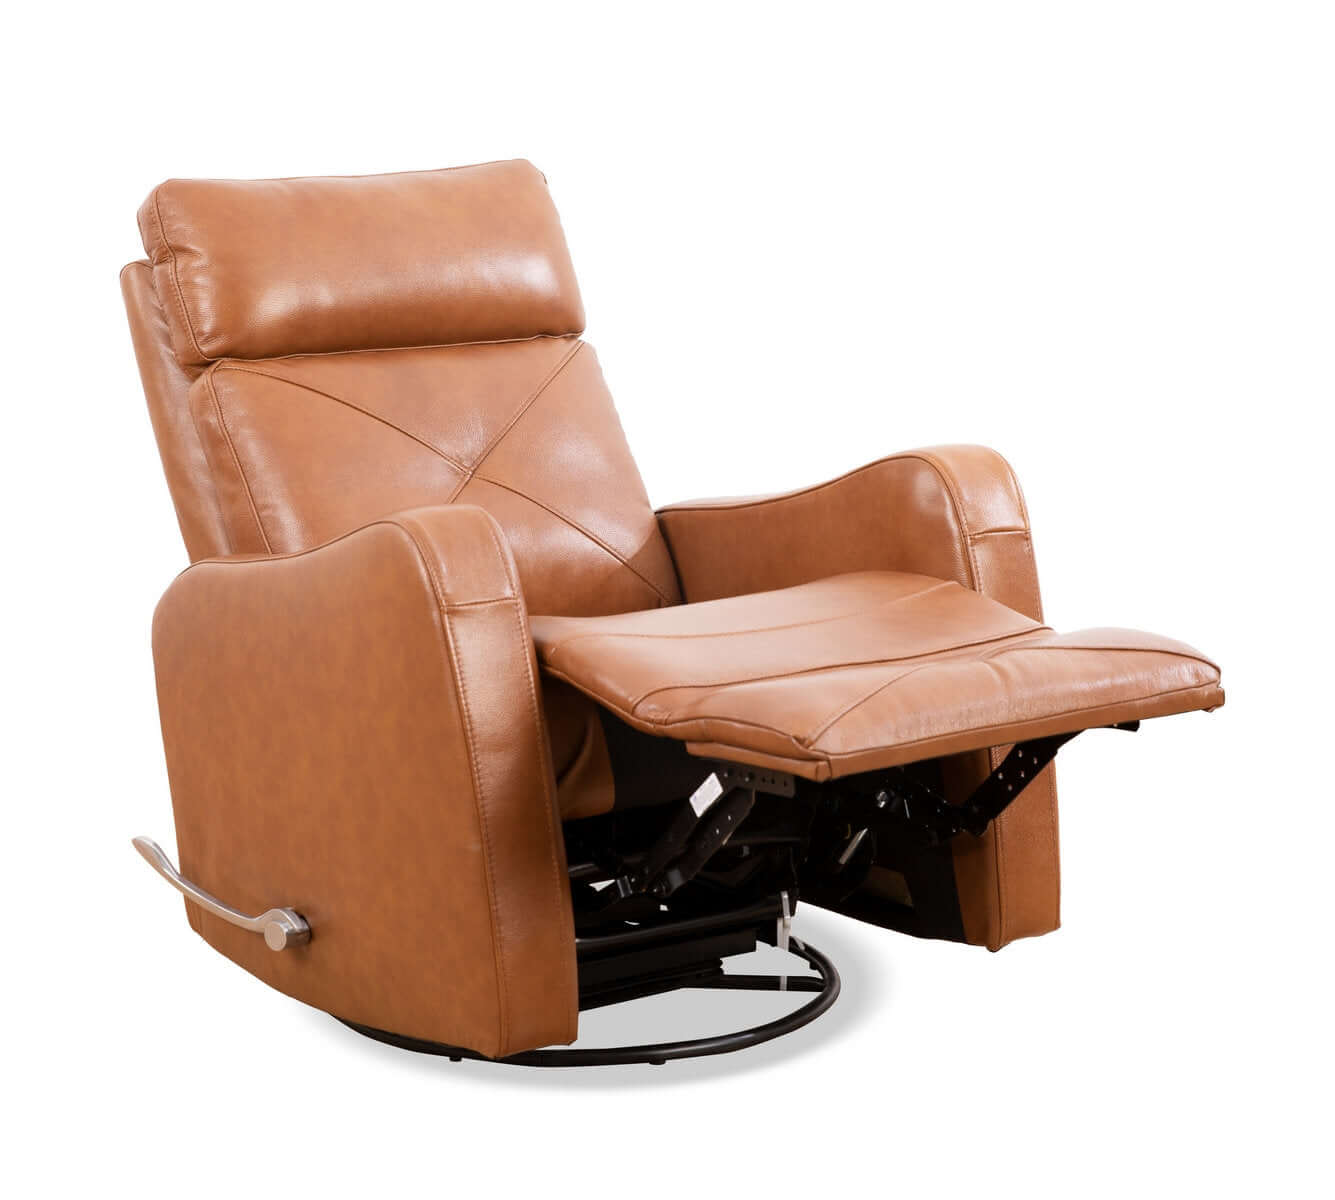 International Furniture Distribution Centre - Brown Leather Manual Recliner Chair with Solid Hardwood Frame - IF 6331